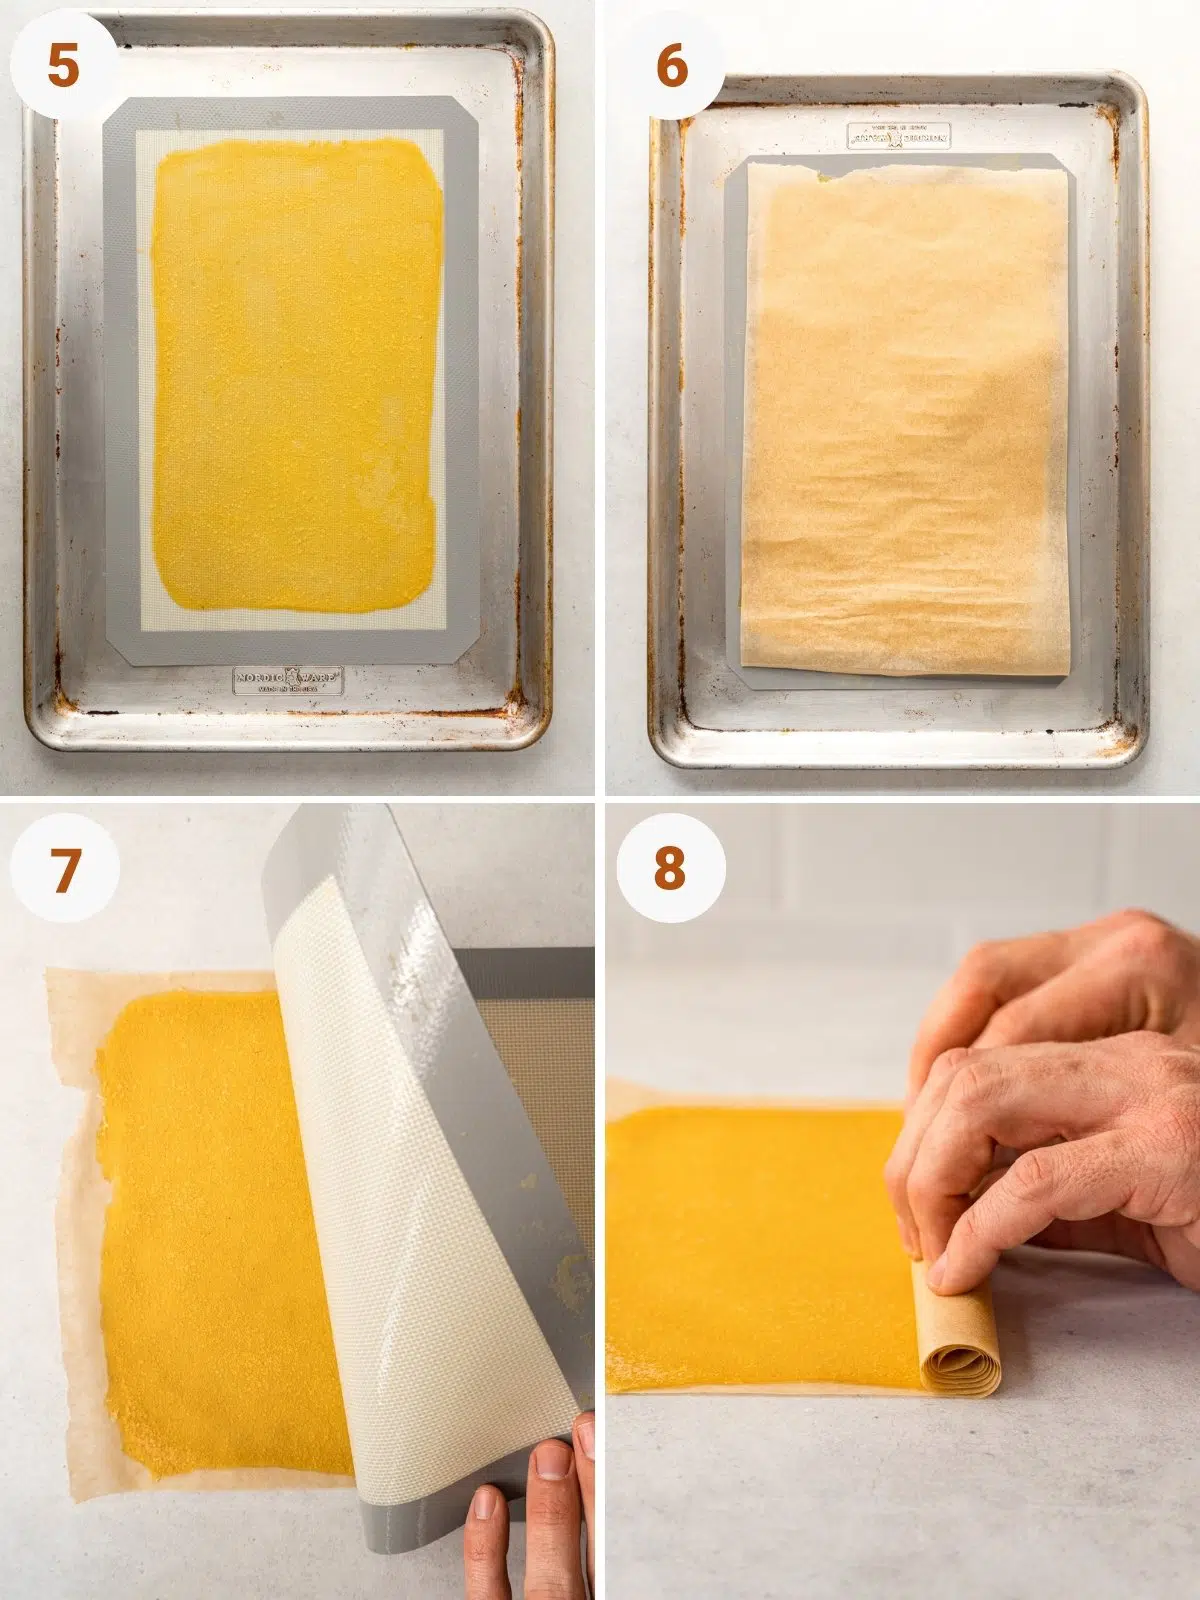 How to make fruit leathers steps 5-8